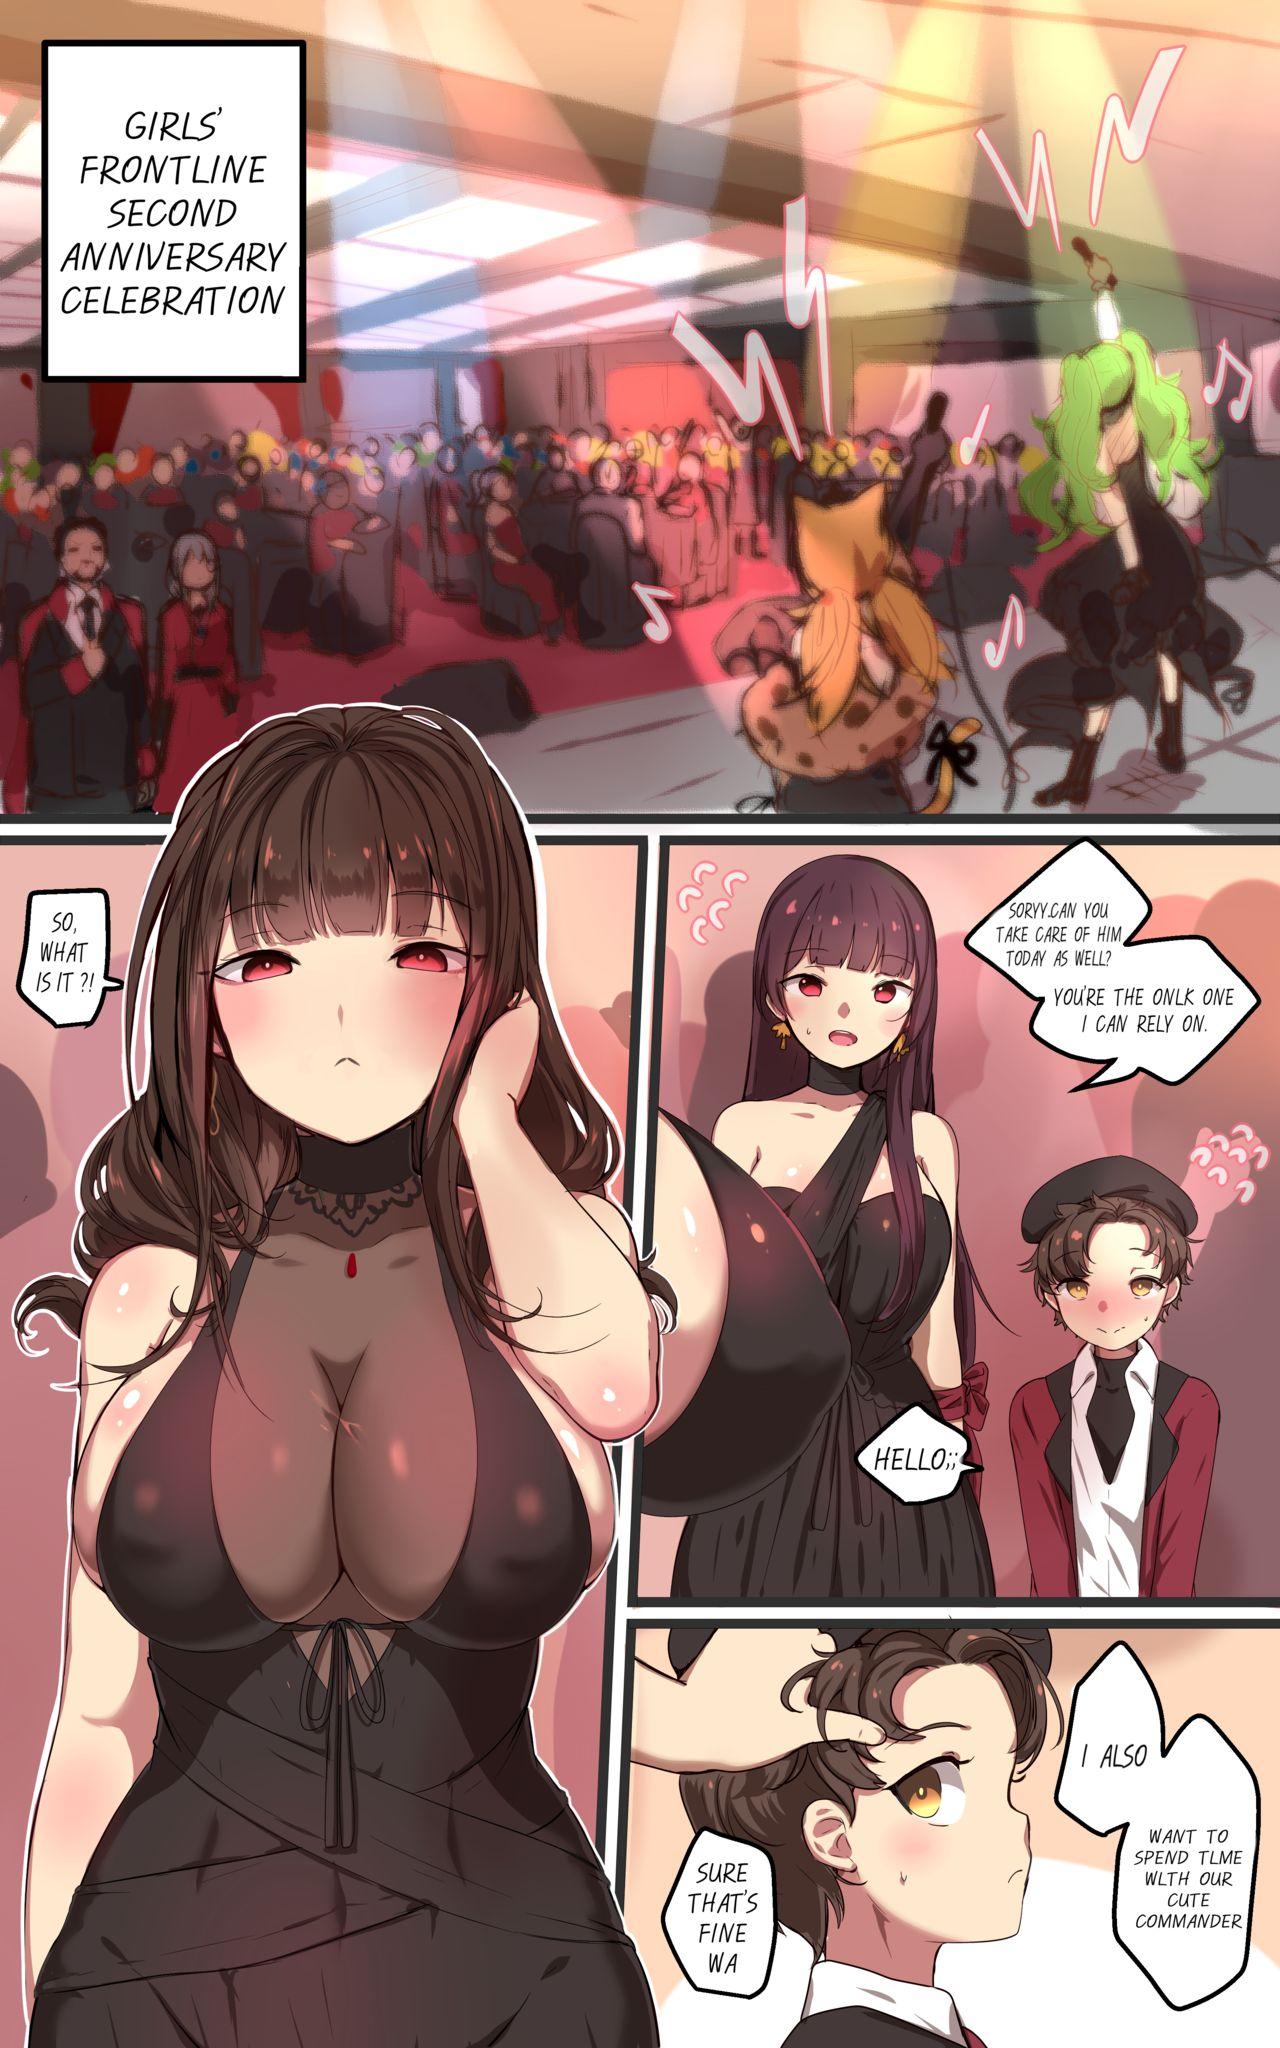 Hardon How to use dolls 07 - Girls frontline Sologirl - Page 2